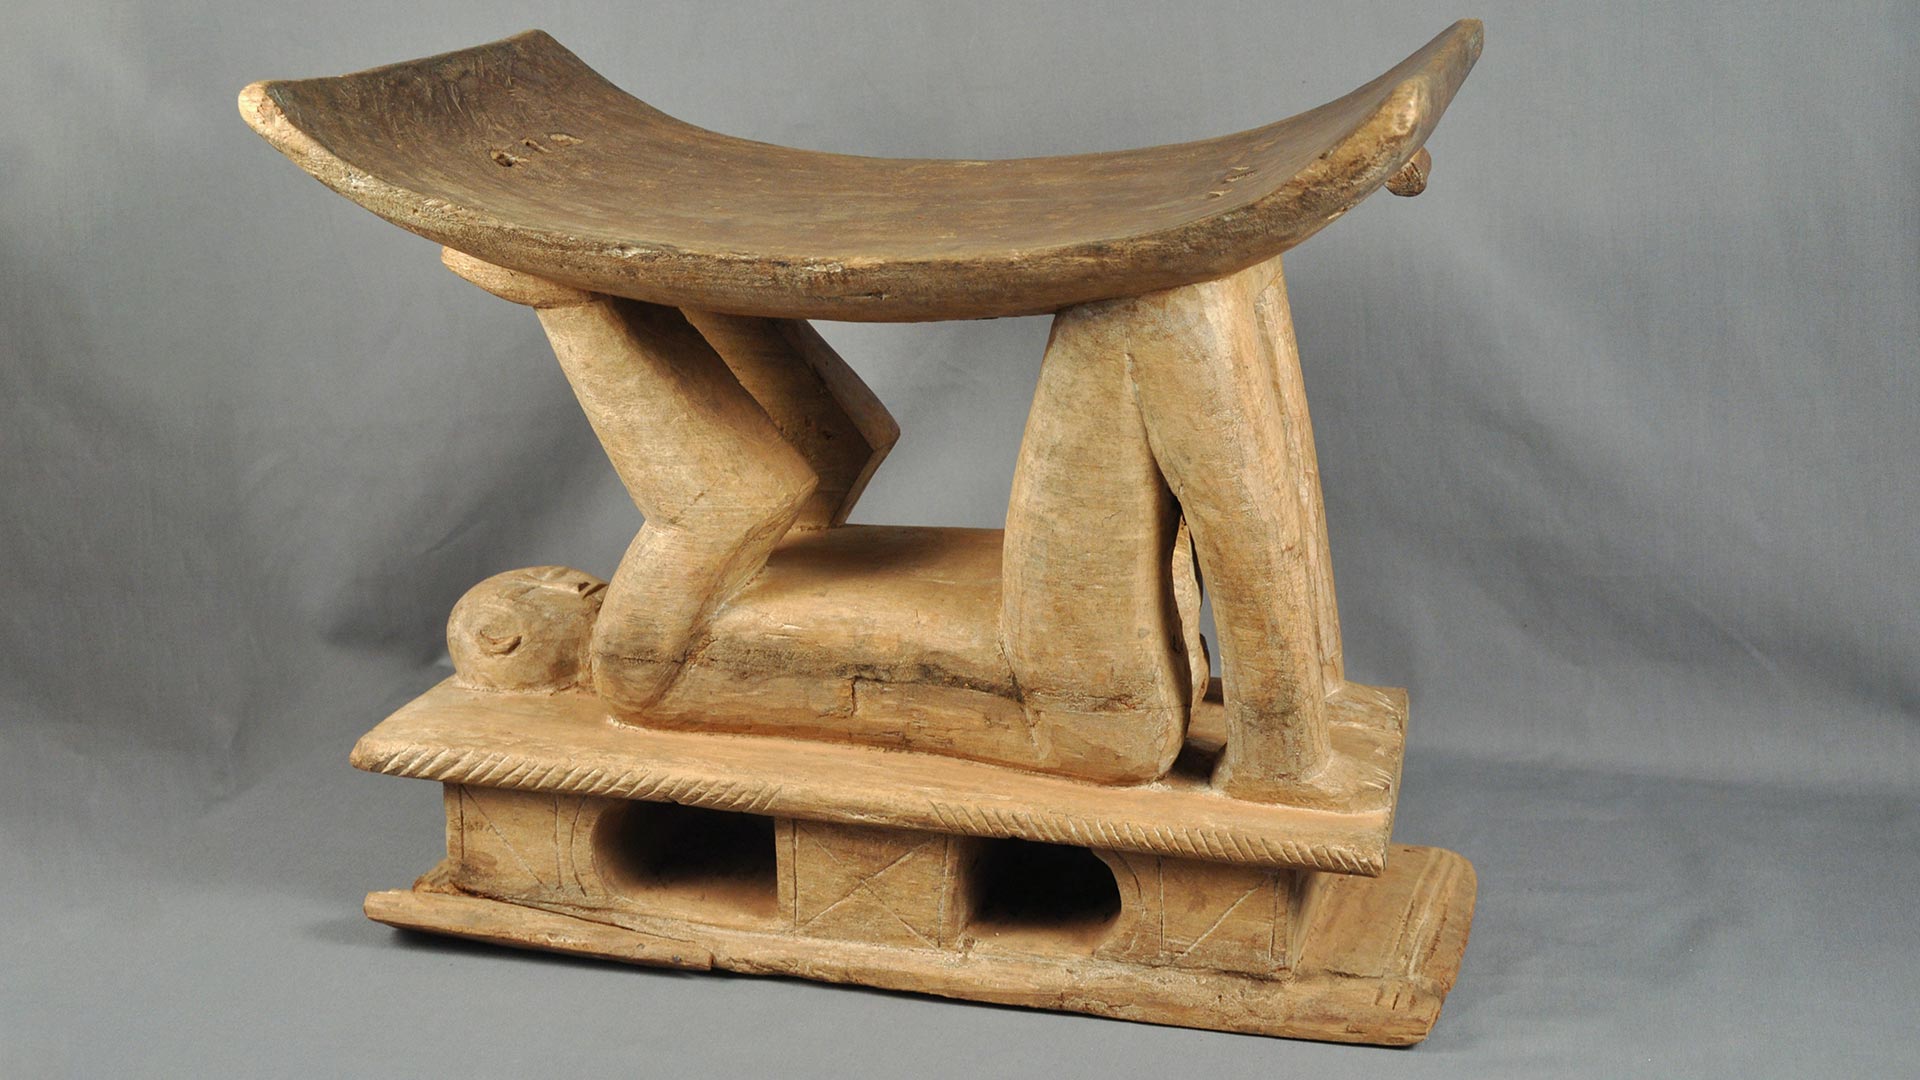 carved wooden stool with a carved human figure laying on their back, holding up a curved seat with their arms and knees